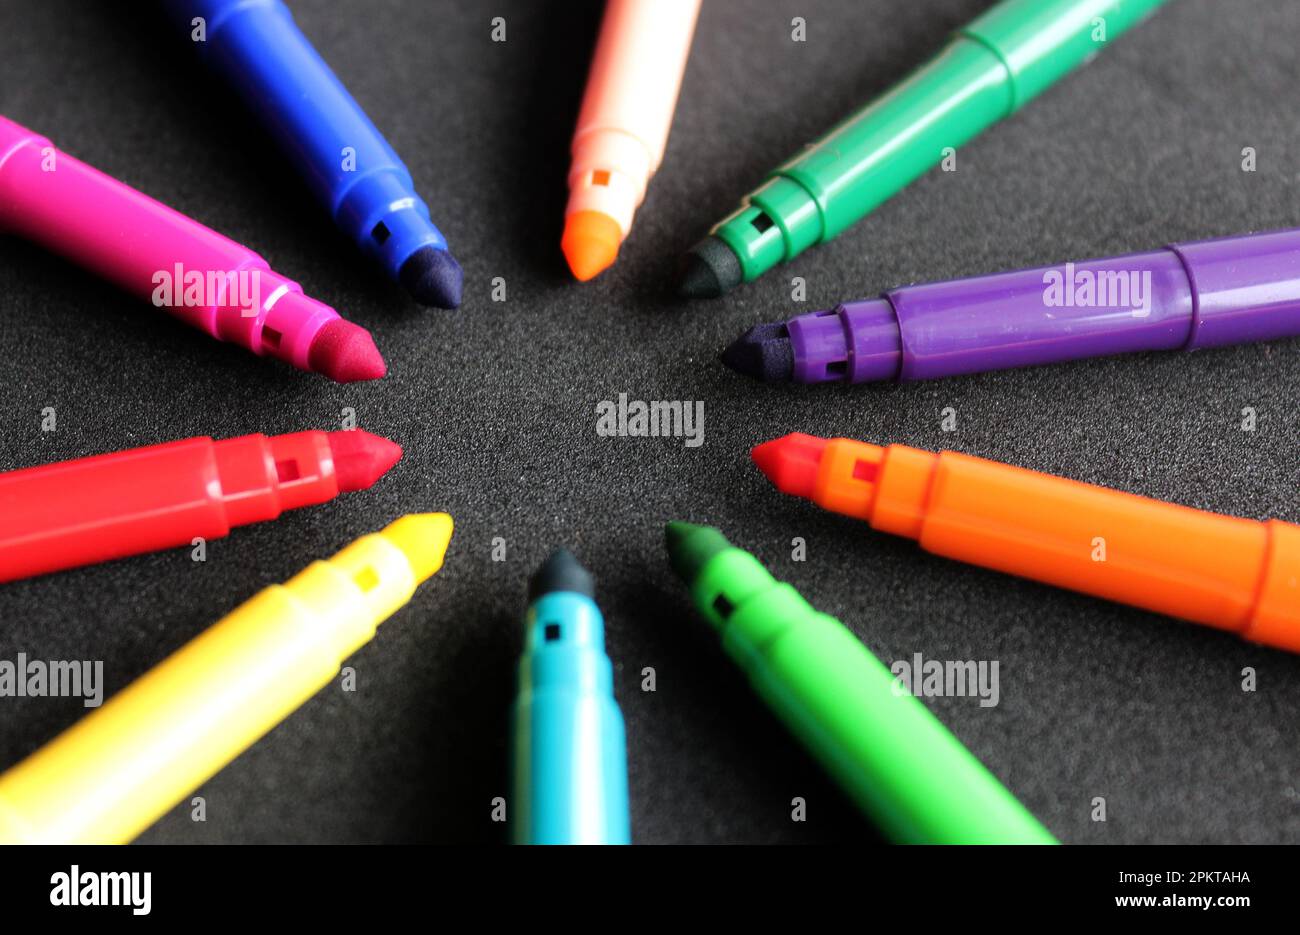 Round Pattern Of Colored Felt Pens Without Covers Angle View Closeup Stock Photo Stock Photo